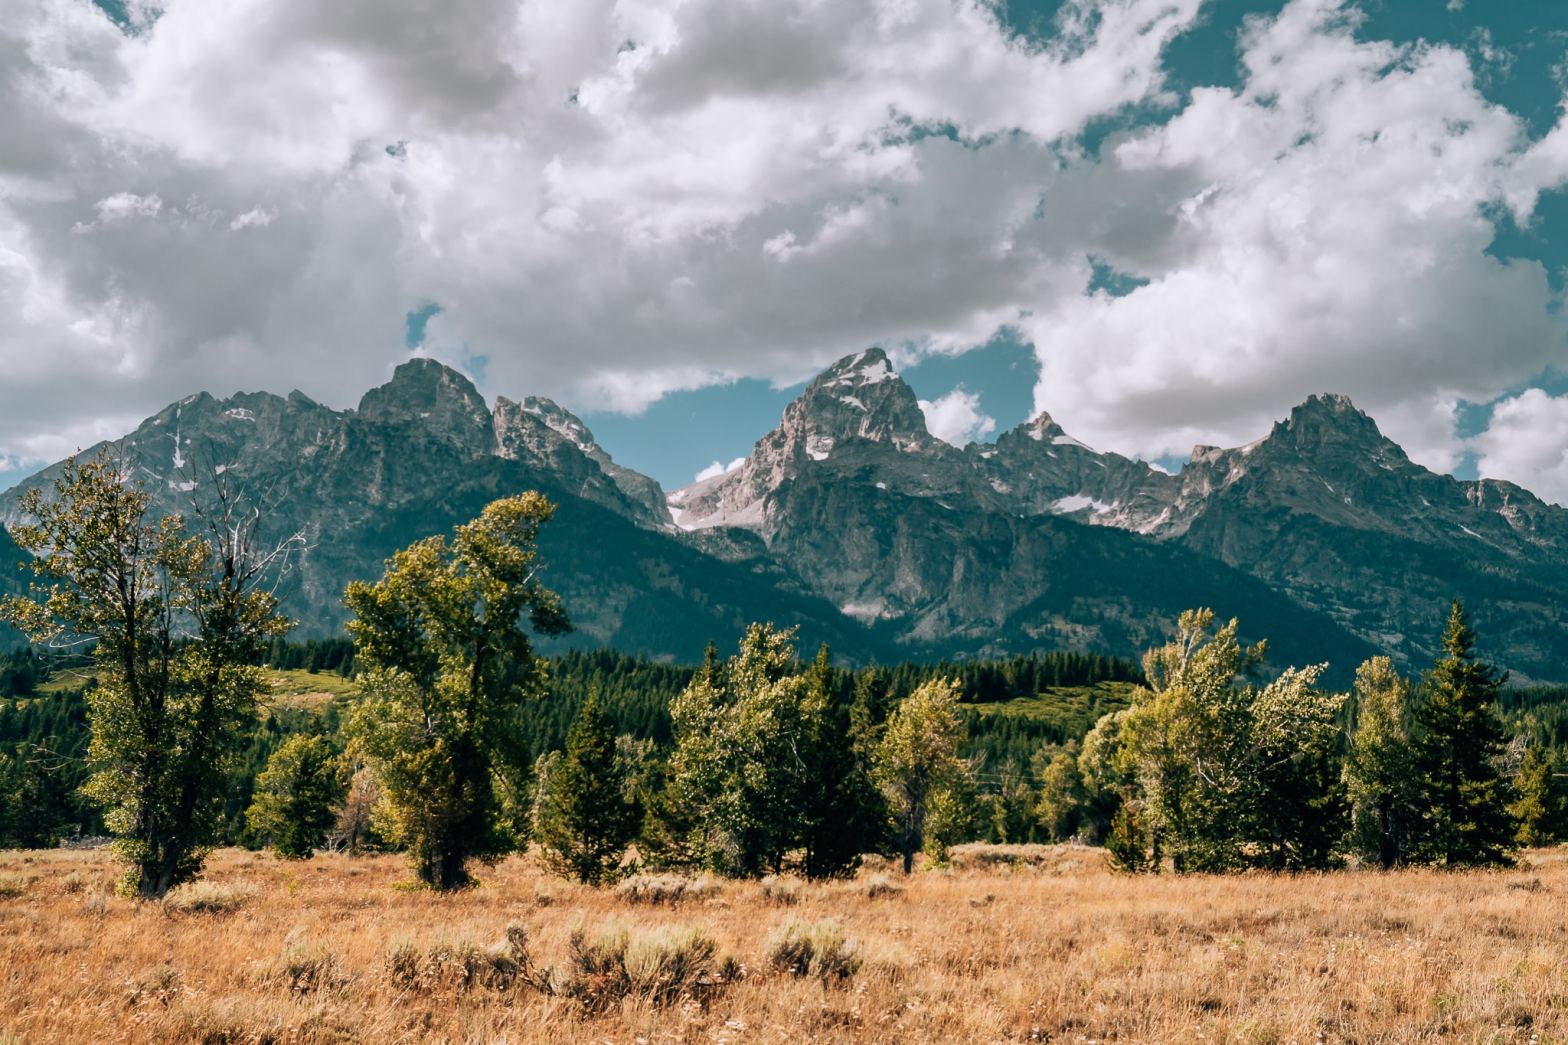 View of the Teton Mountain range with trees in the front and a cloudy sky